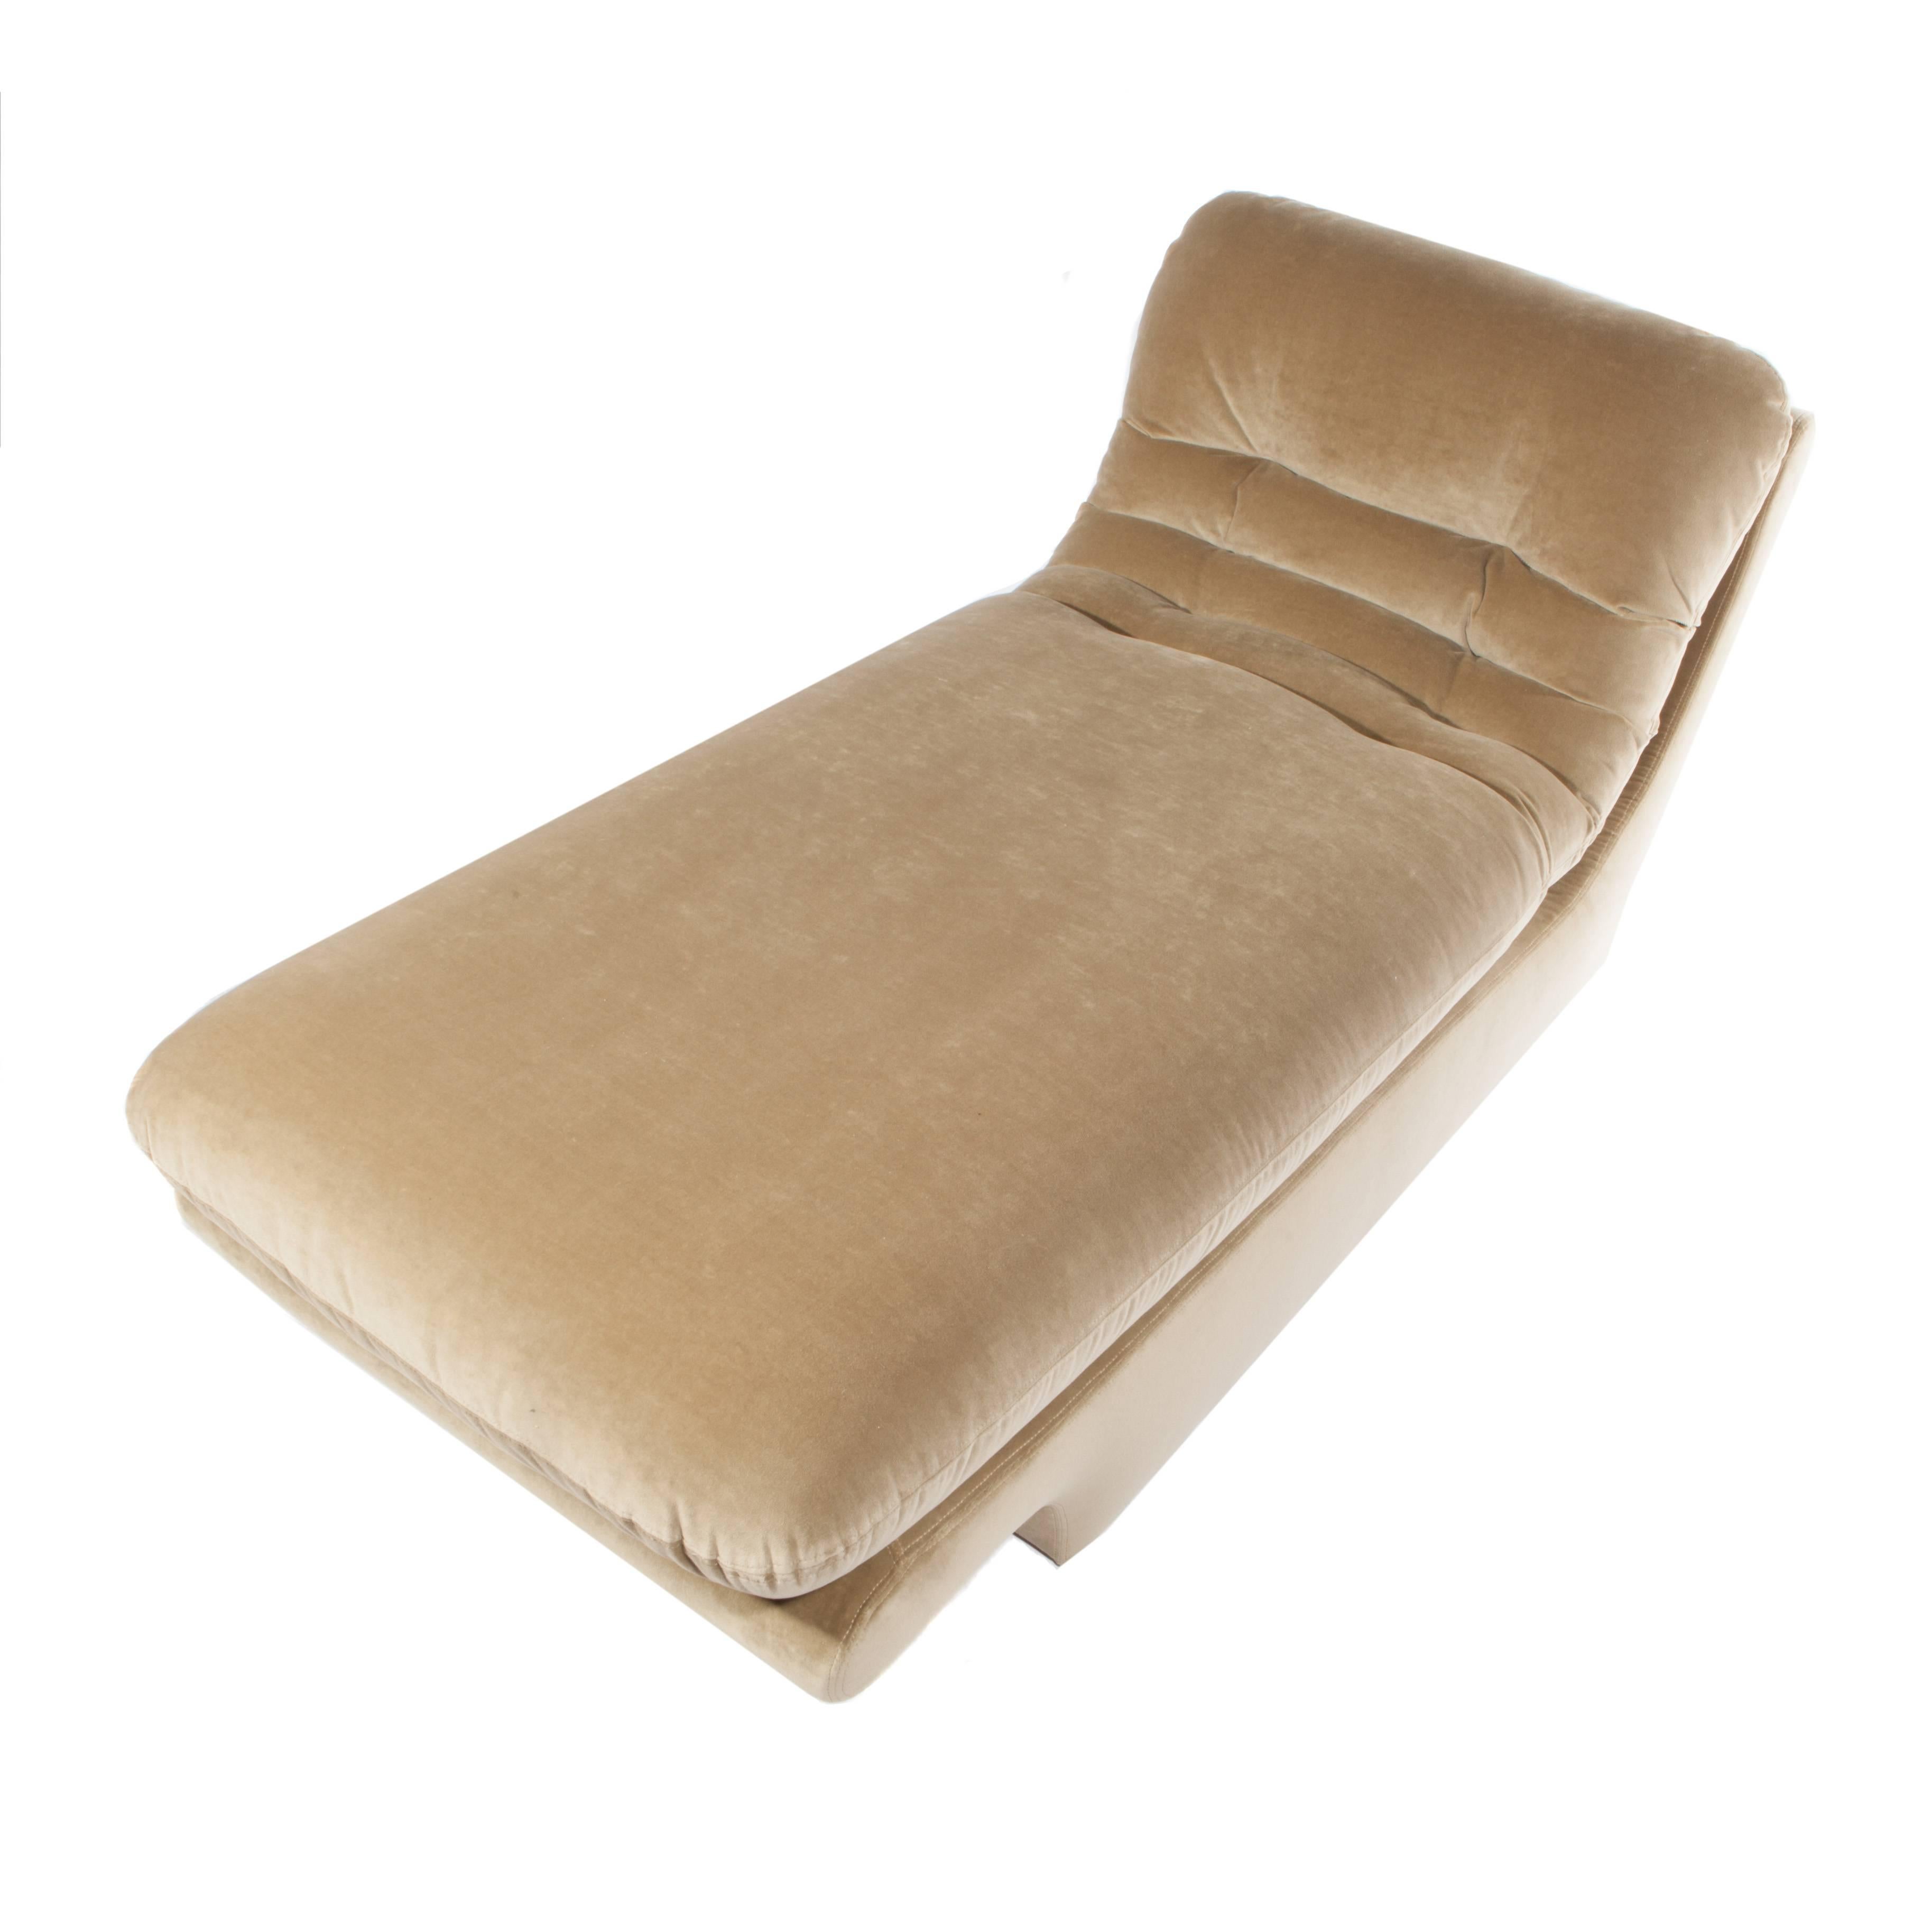 This large and comfortable 1970s chaise longue is fully upholstered and features rounded lines and a cantilevered foot. Newly reupholstered in a warm camel cotton velvet. This item is in our Brooklyn showroom.